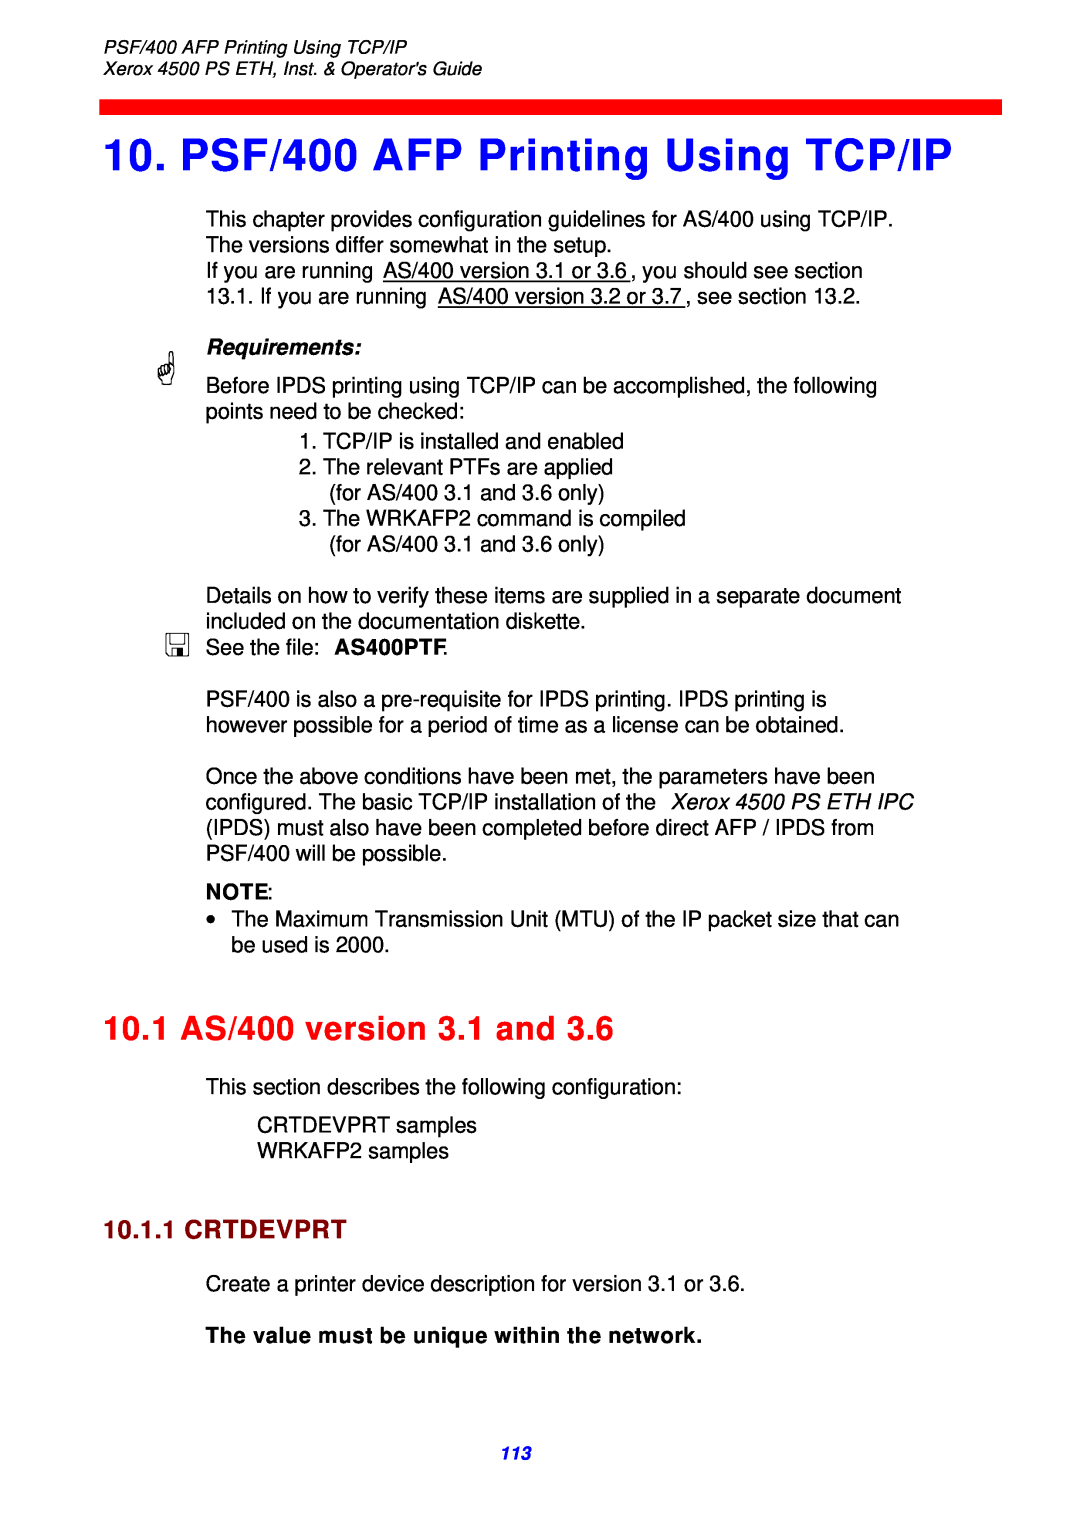 Xerox 4500 ps eth PSF/400 AFP Printing Using TCP/IP, 10.1 AS/400 version 3.1 and, Crtdevprt, Requirements 